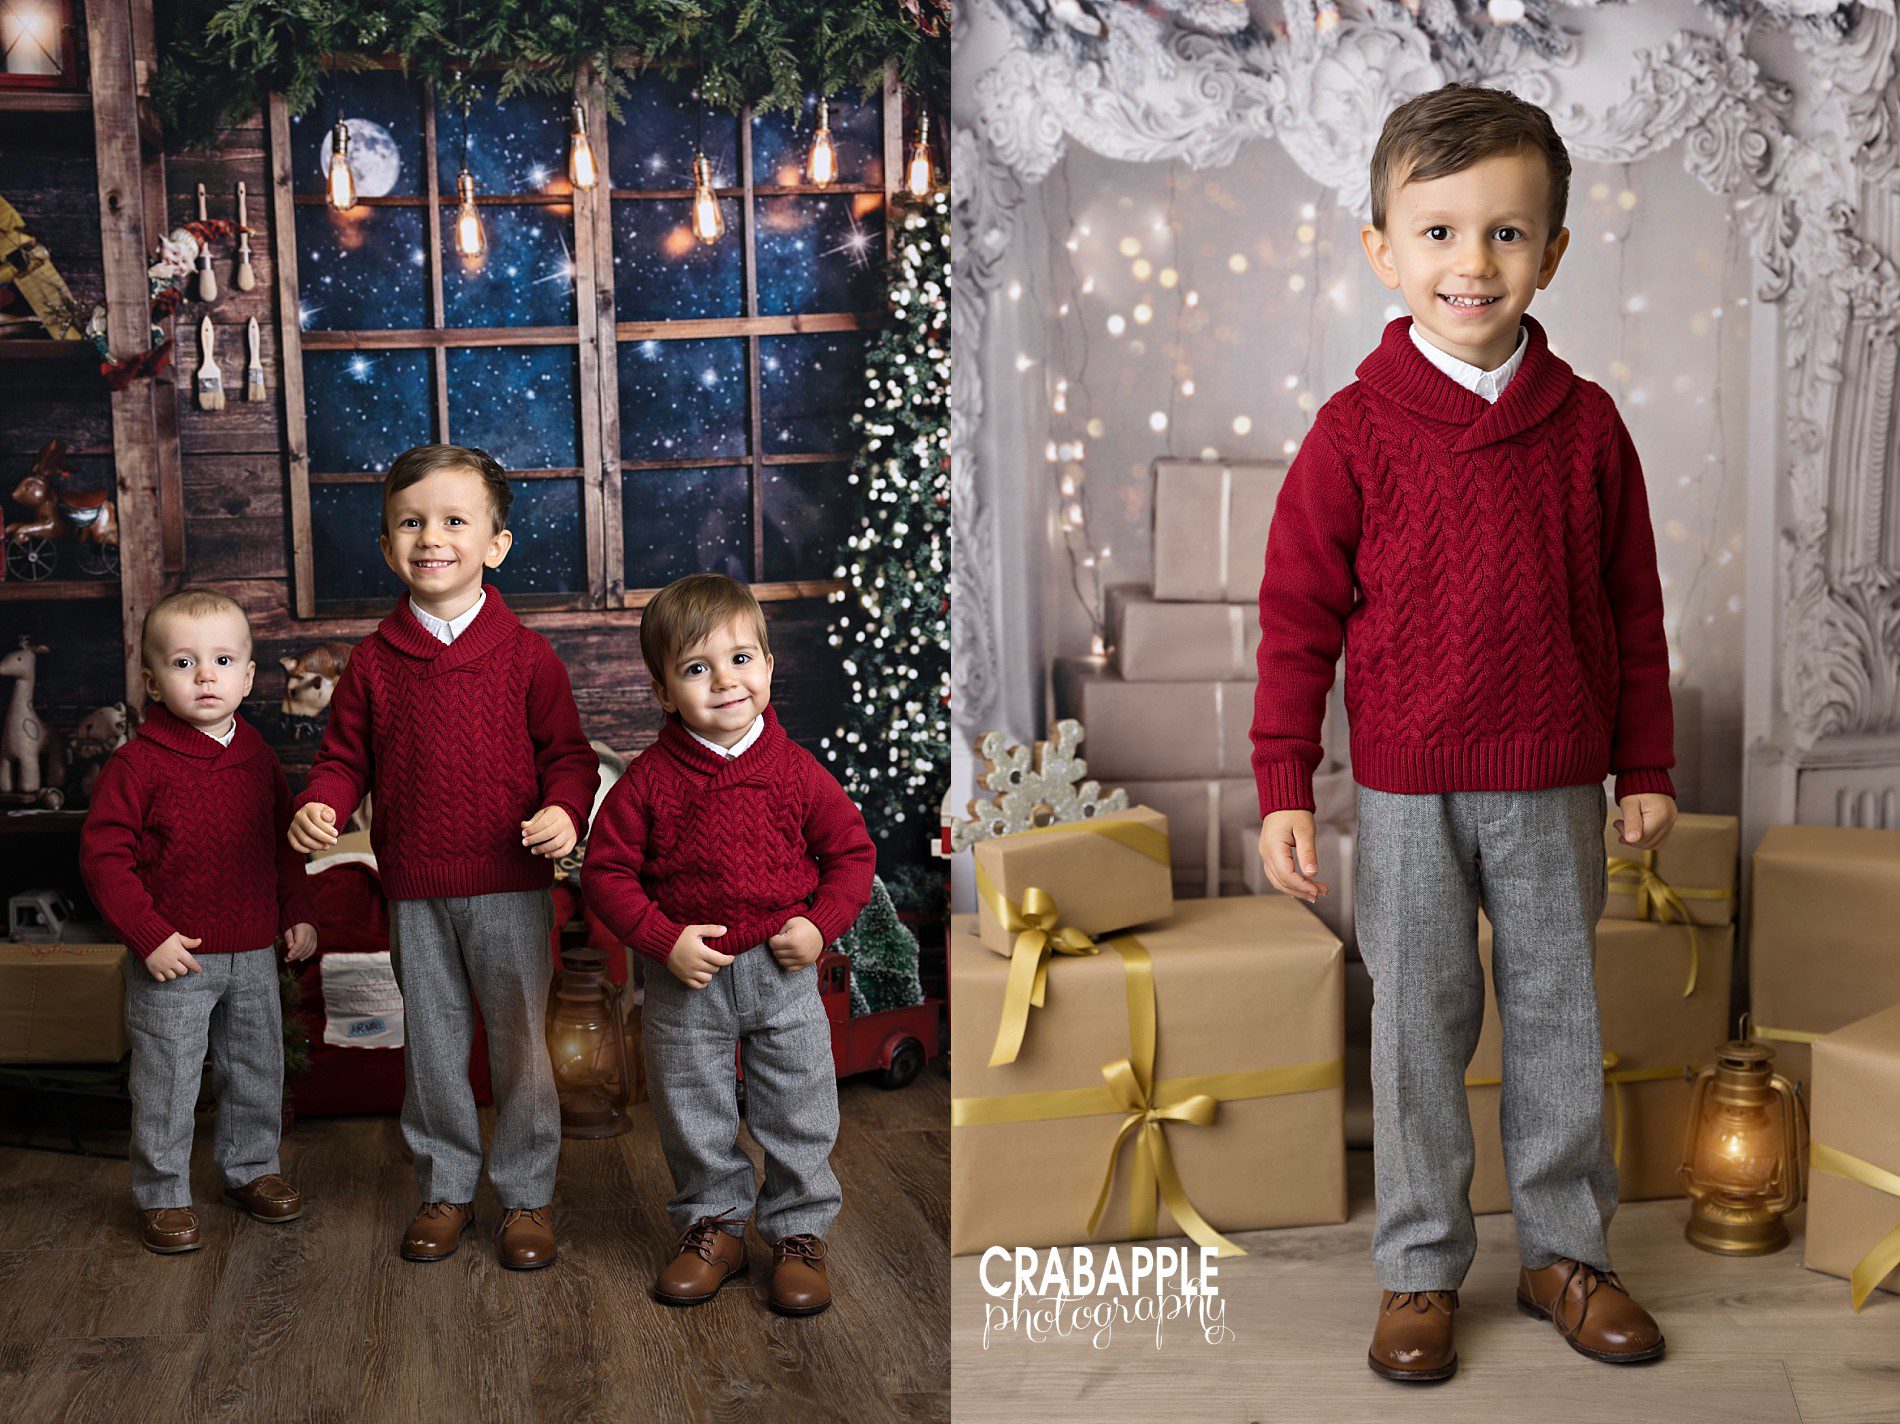 matching sweaters for cousins for christmas photos